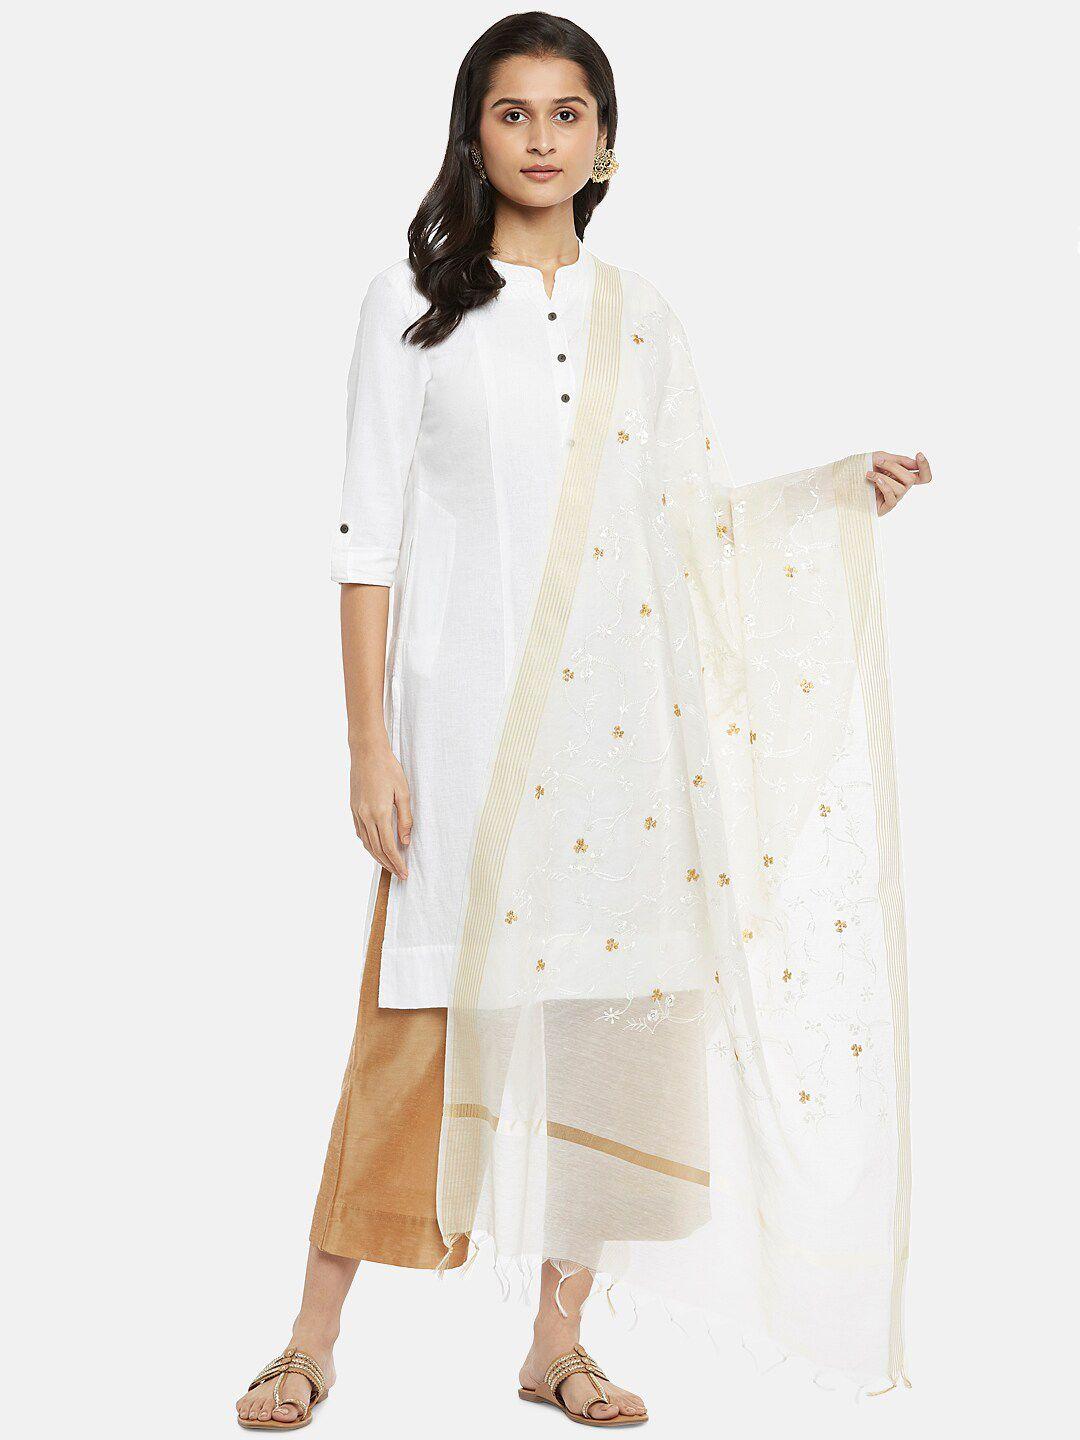 rangmanch by pantaloons women off white embroidered dupatta